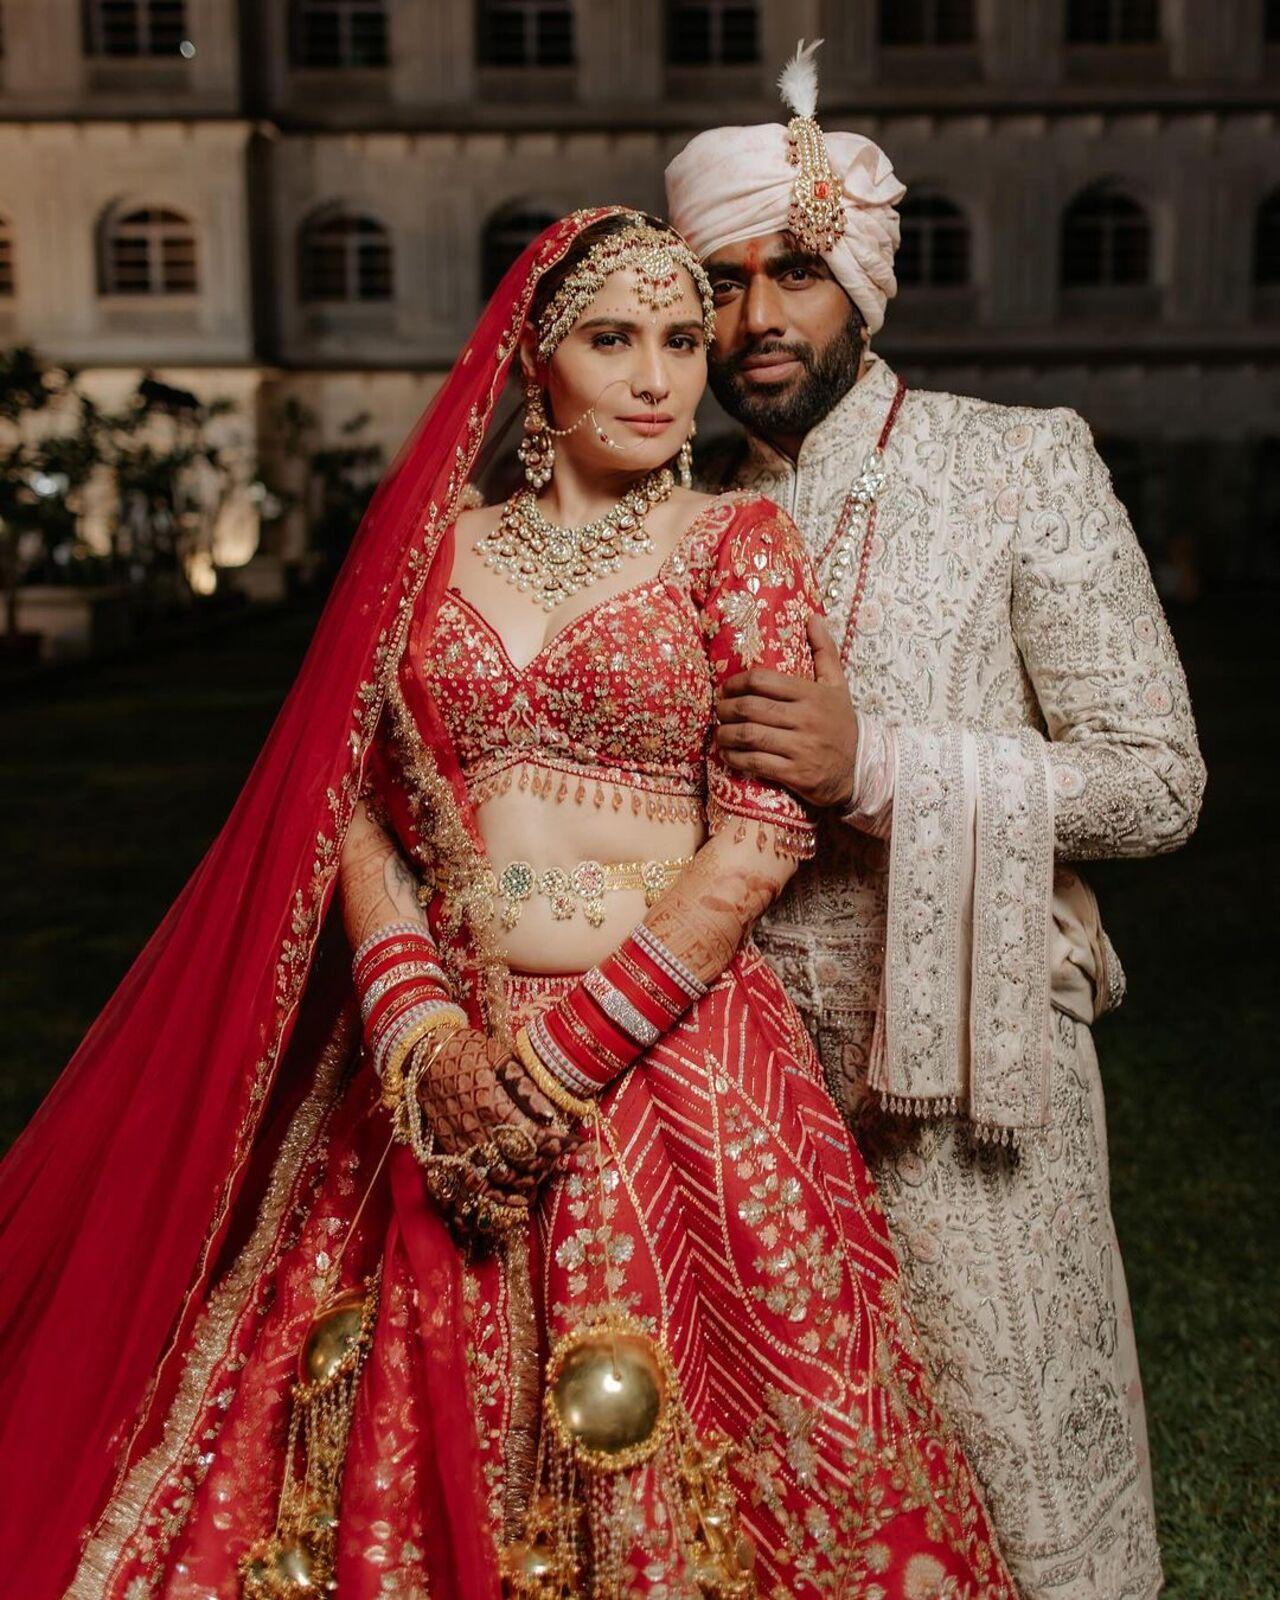 Bigg Boss 13's Arti Singh stepped into a new chapter of her life as she tied the knot with Dipak Chauhan in a beautiful ceremony marked by traditional charm